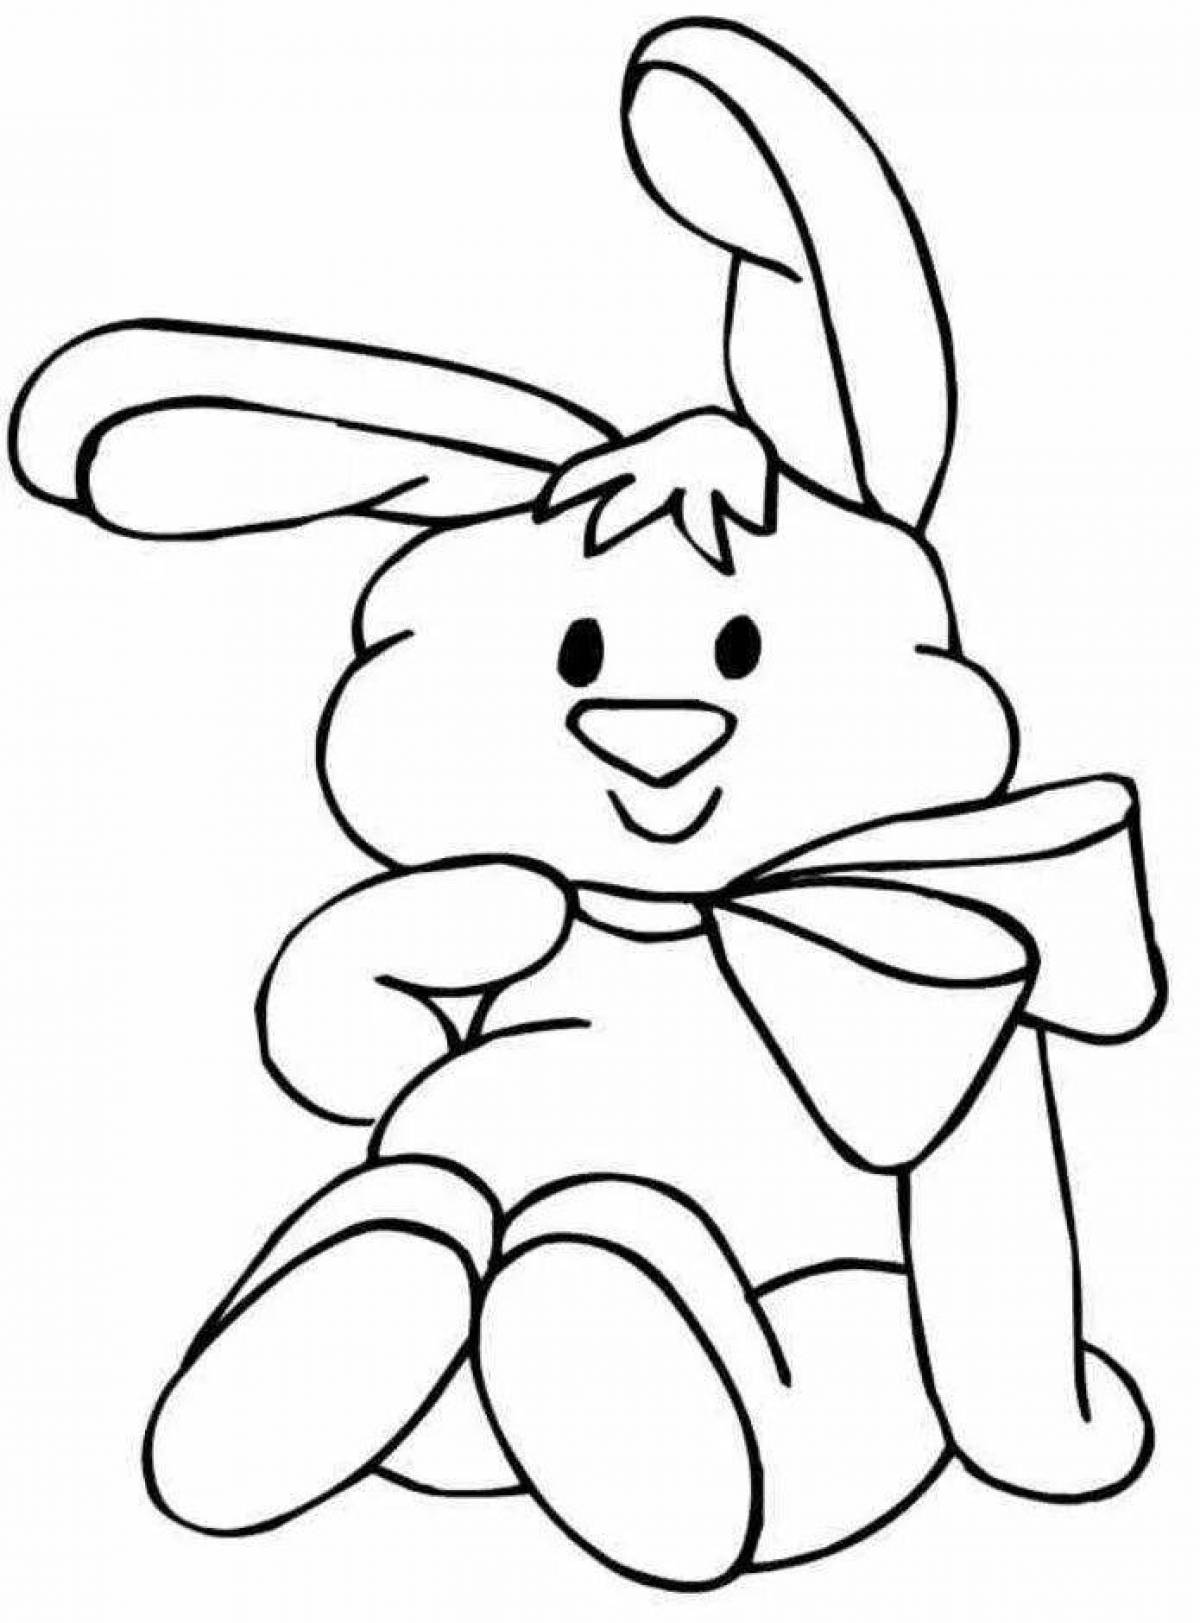 Naughty bunny coloring book for kids